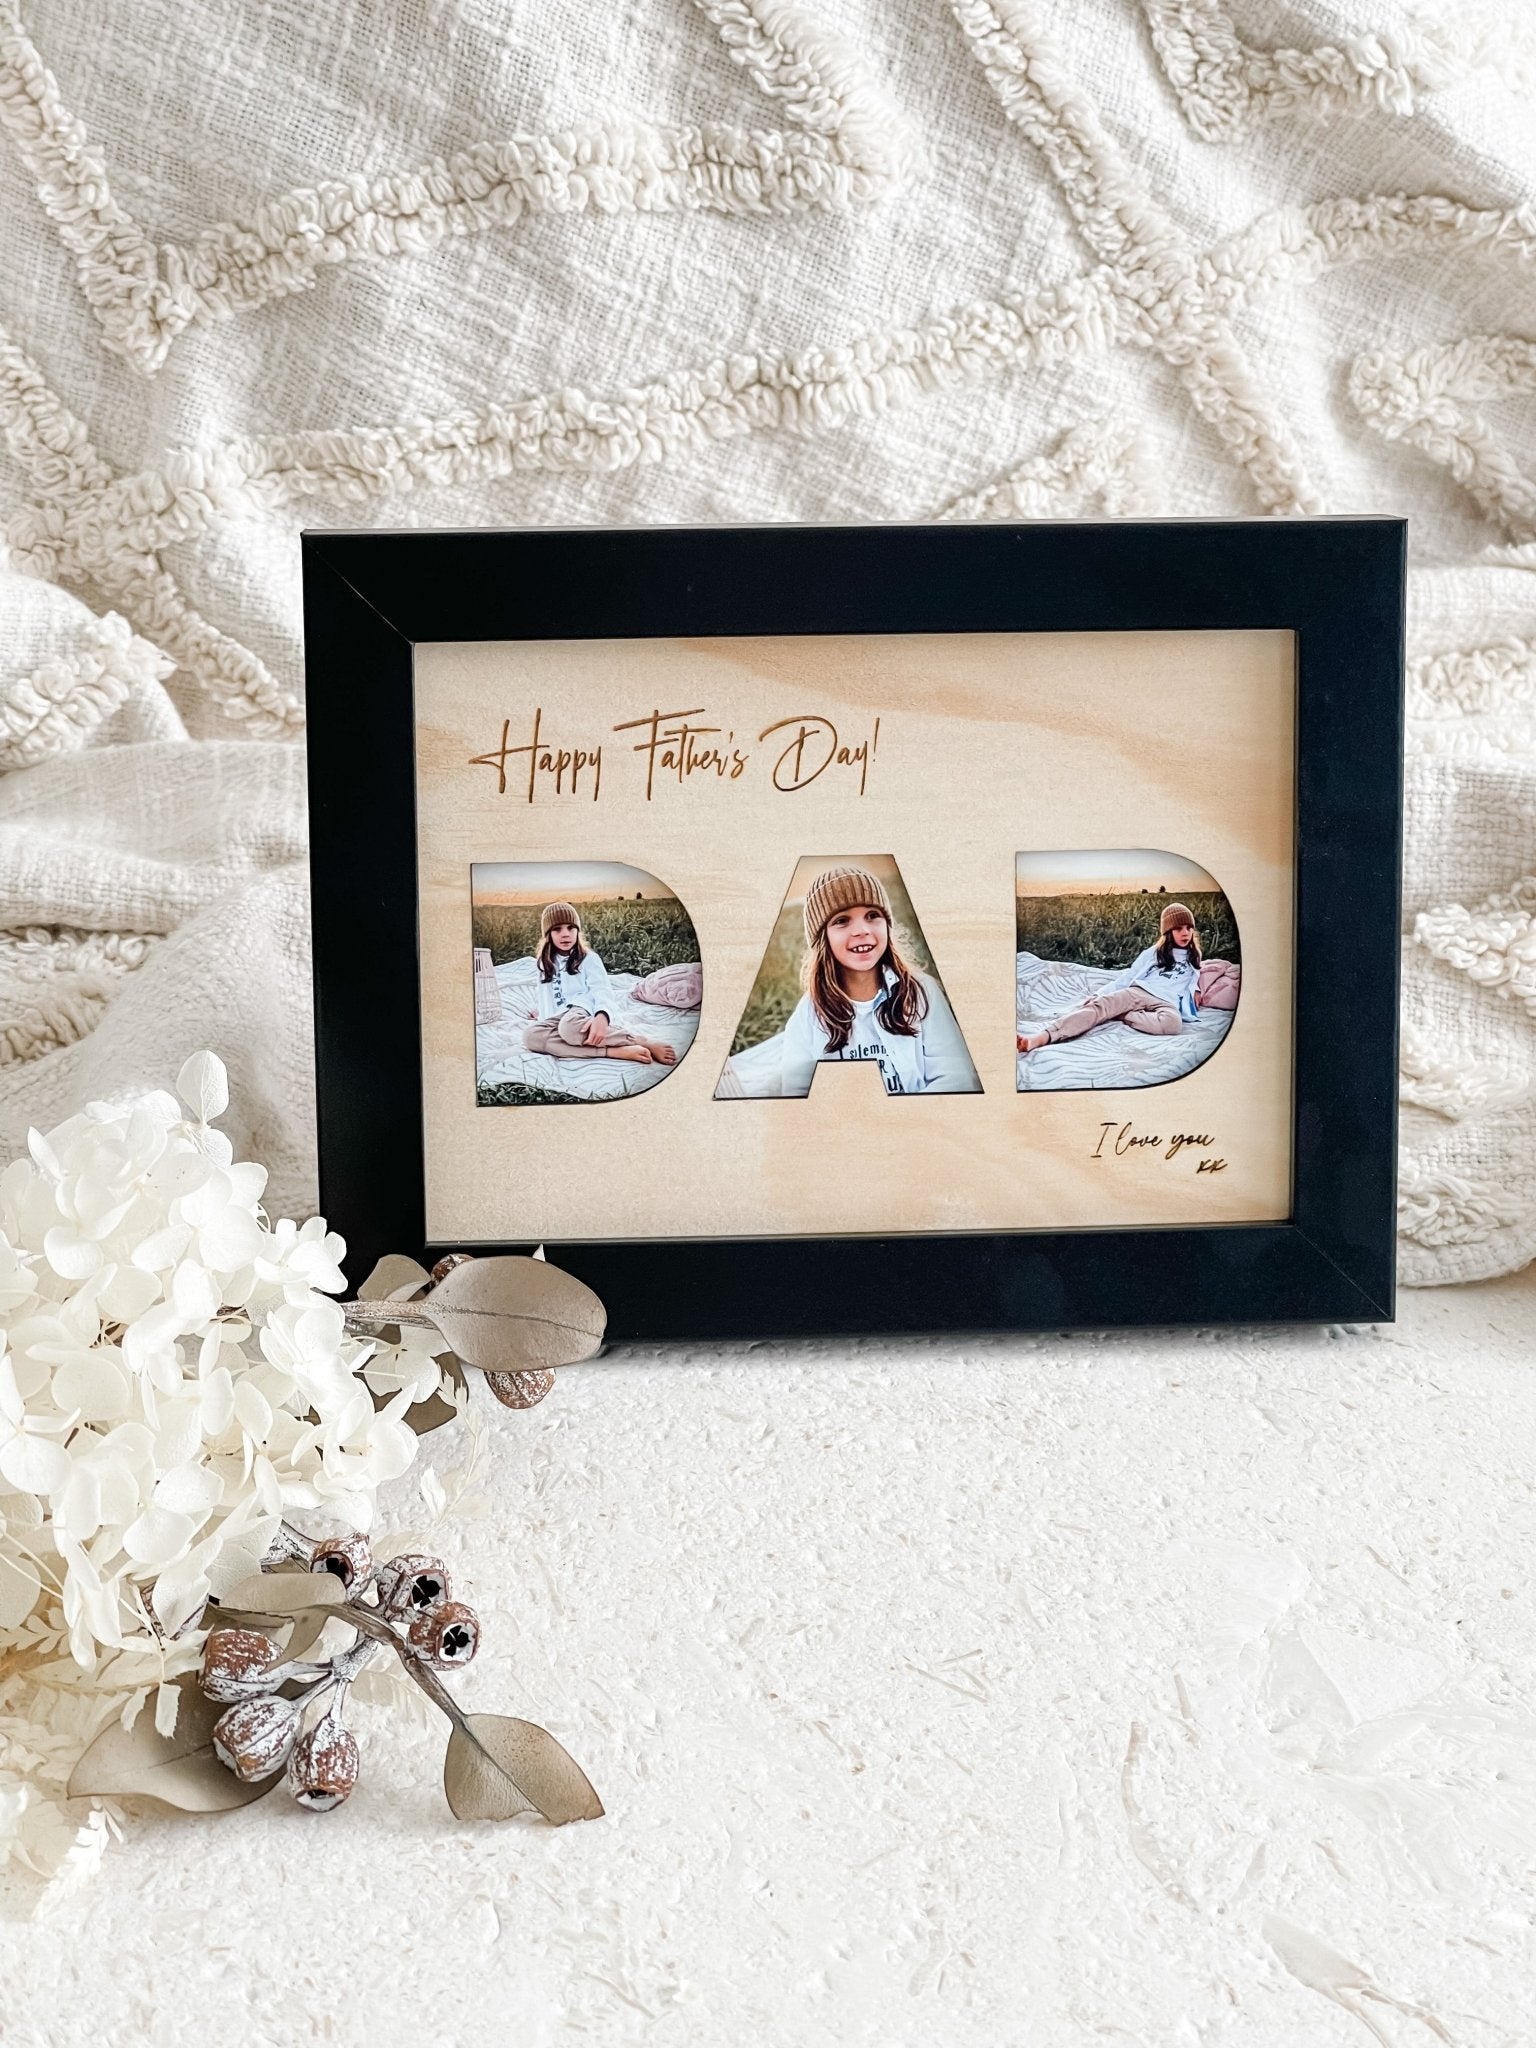 DAD Collage Photo Frame with Wooden Insert - The Humble Gift Co.